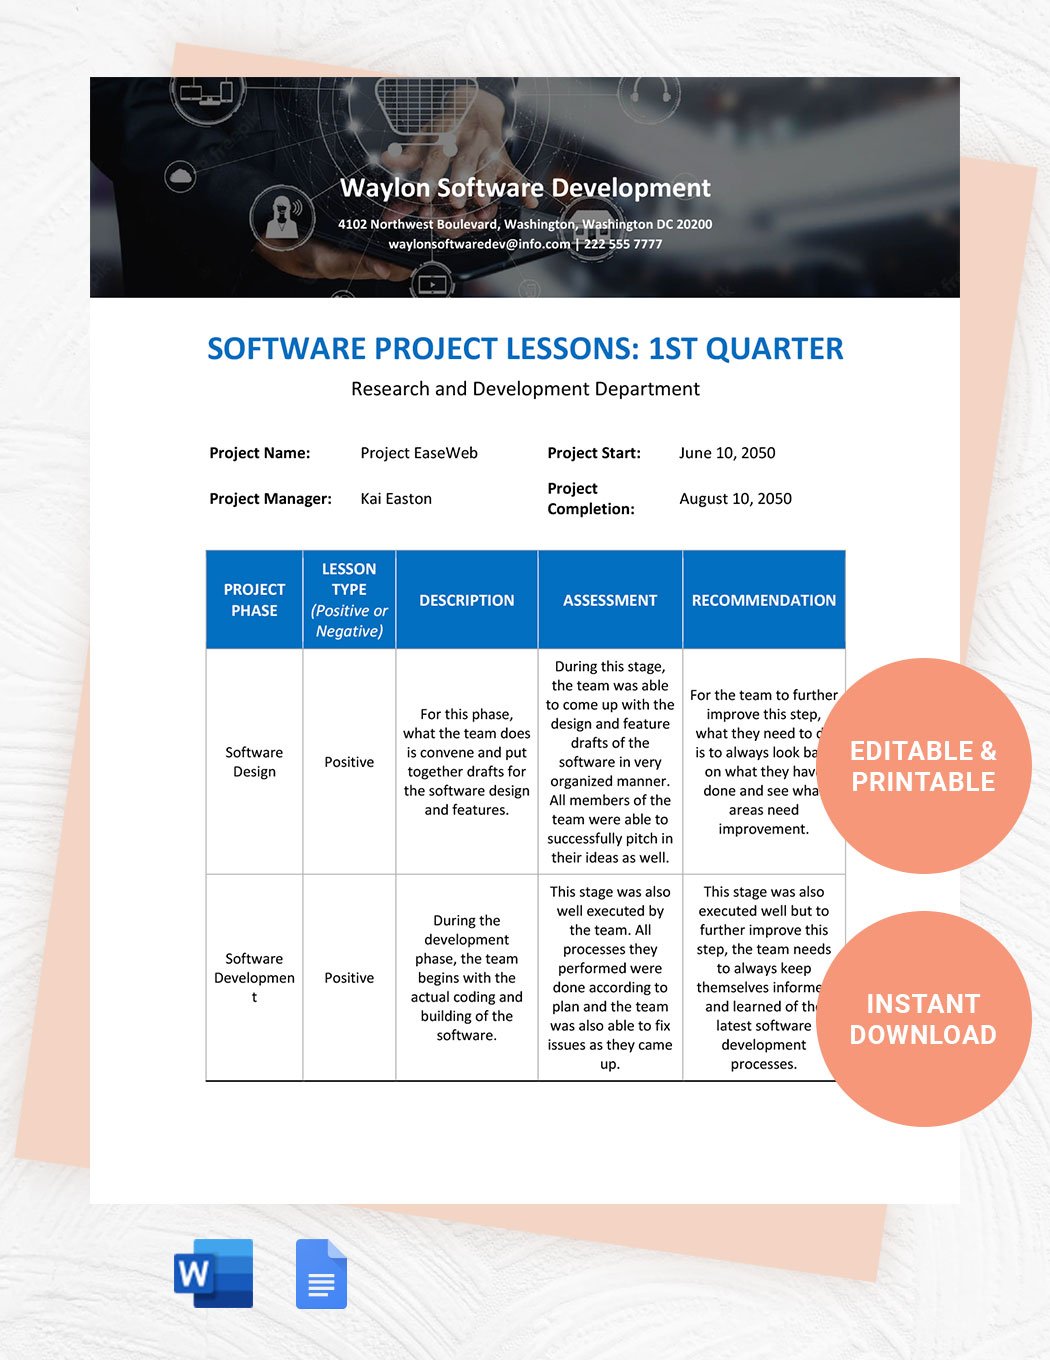 Software Development Lessons Learned Template in Word, Google Docs